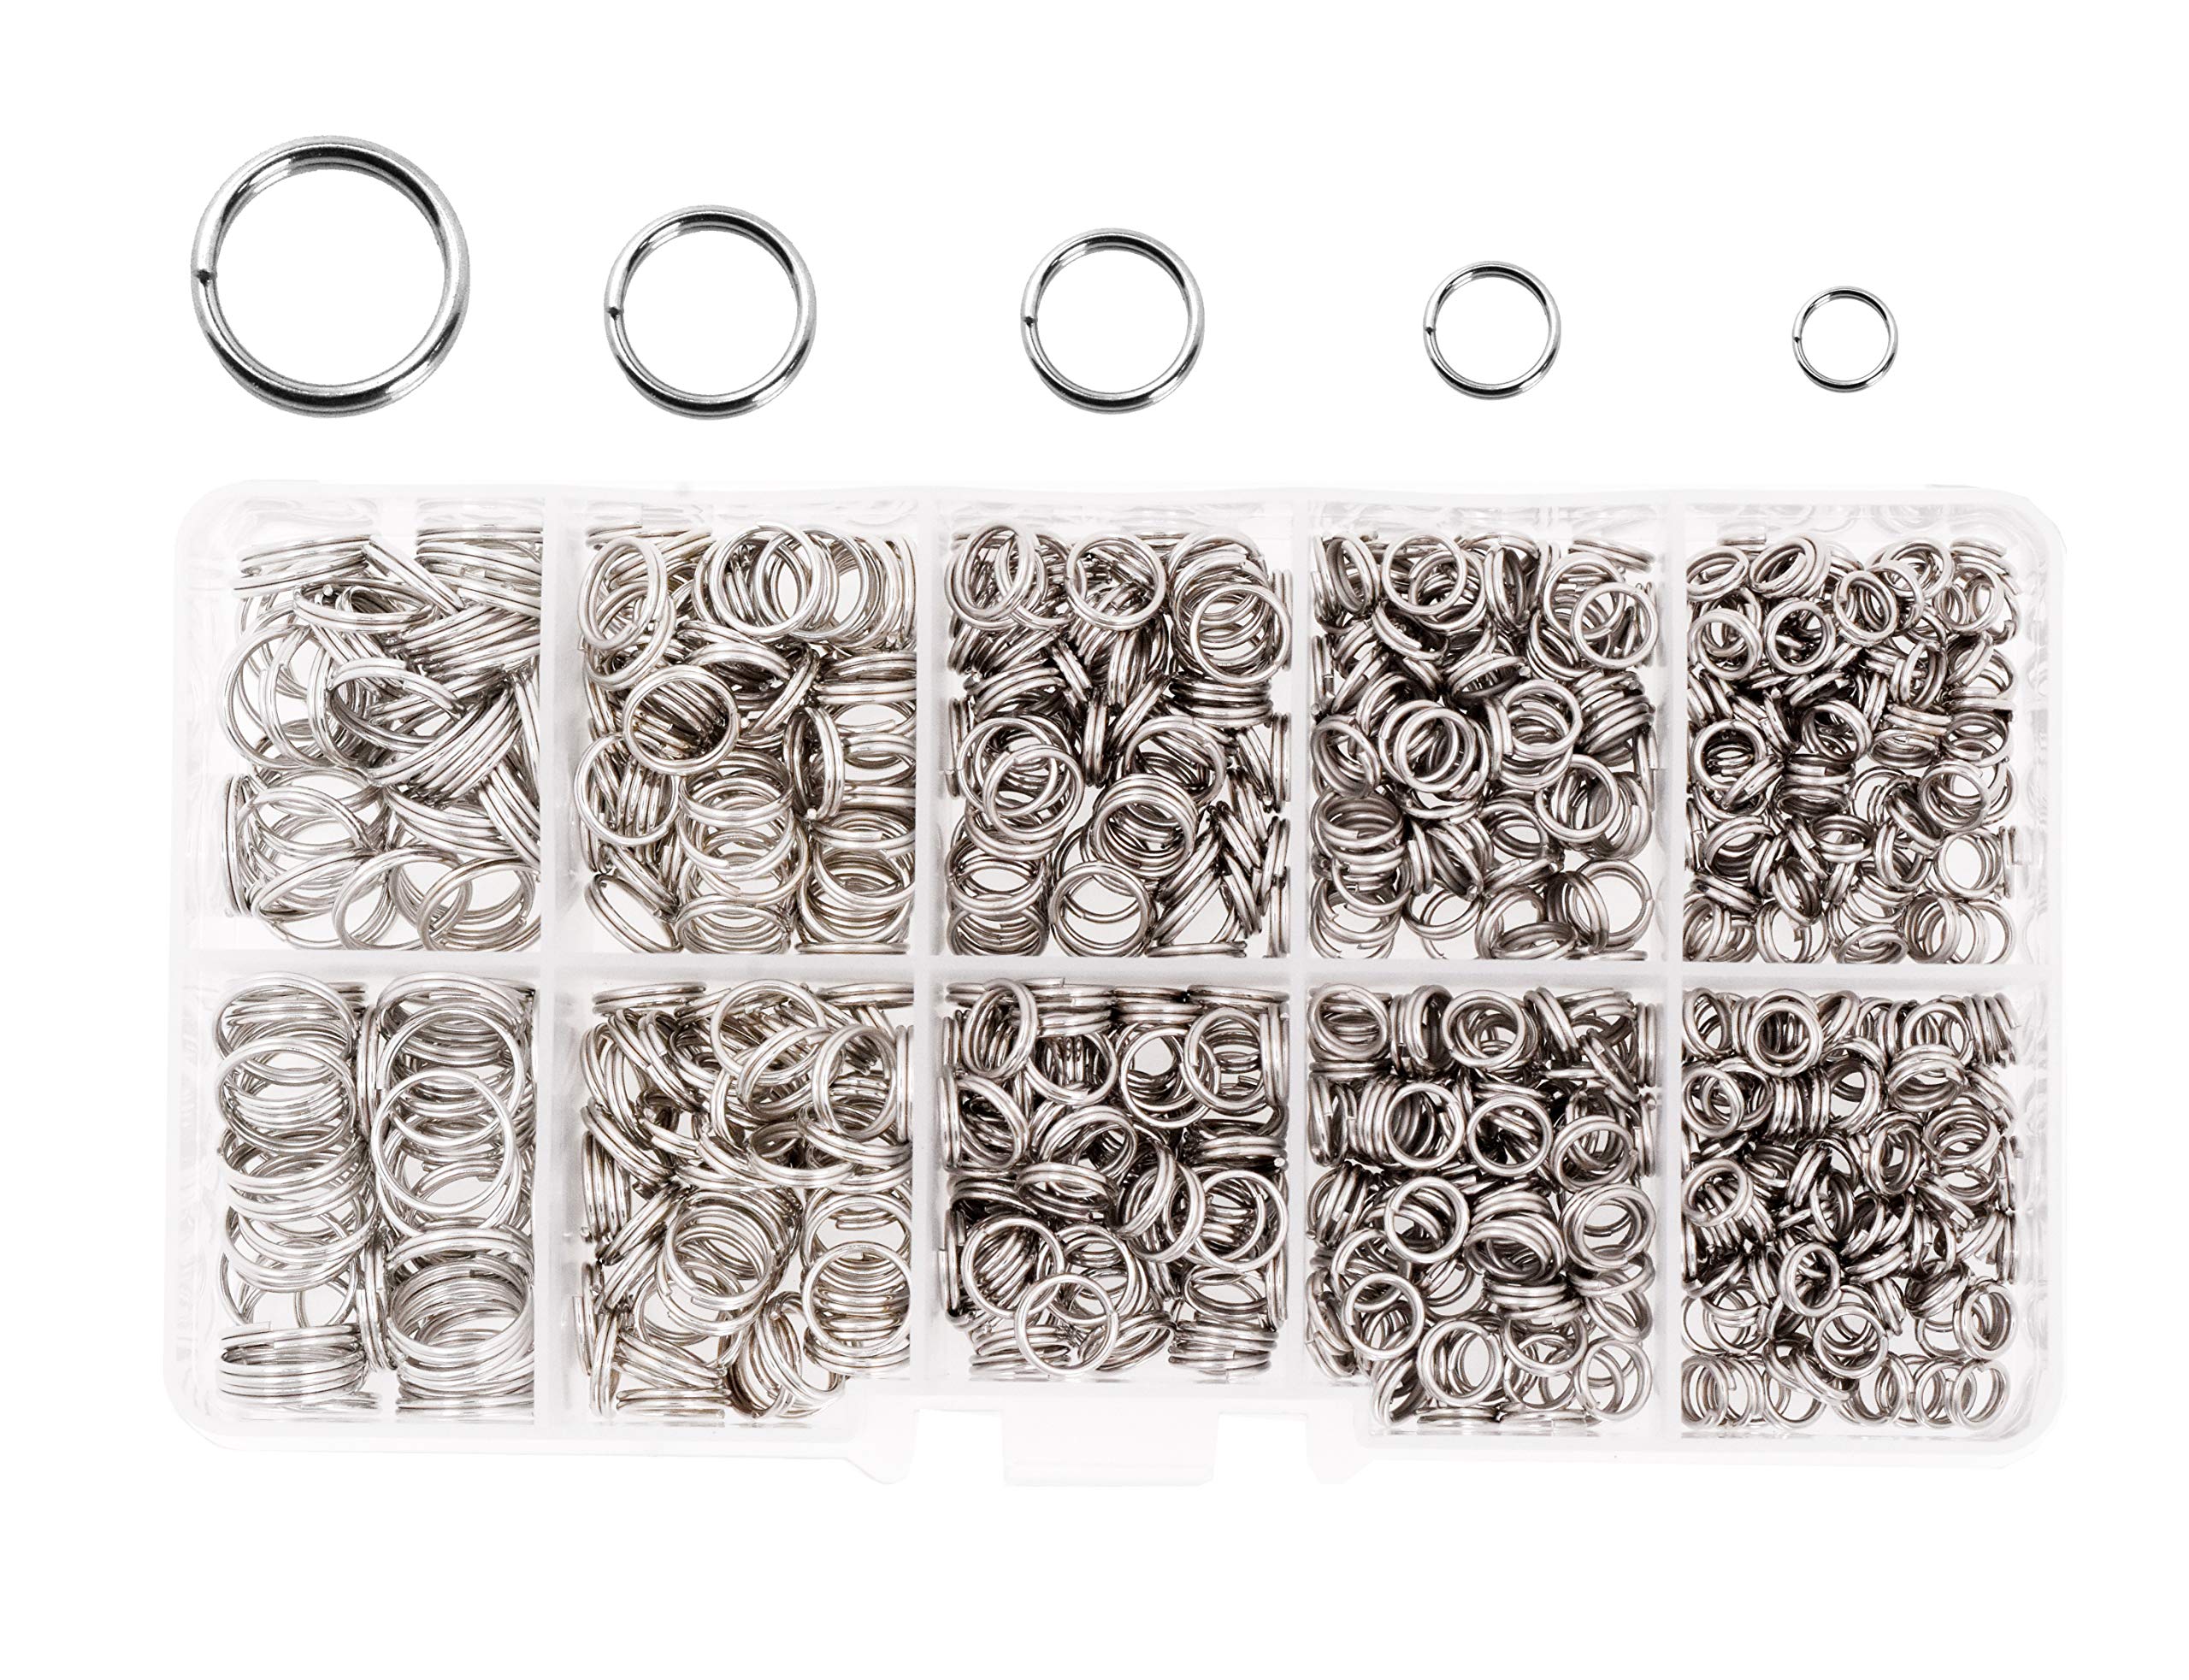 Mandala Crafts Double Split Rings for Keychains - Double Jump Rings for  Jewelry Making Small Key Rings Keys Chandelier Suncatchers 800 PCs Assorted  Sizes Silver